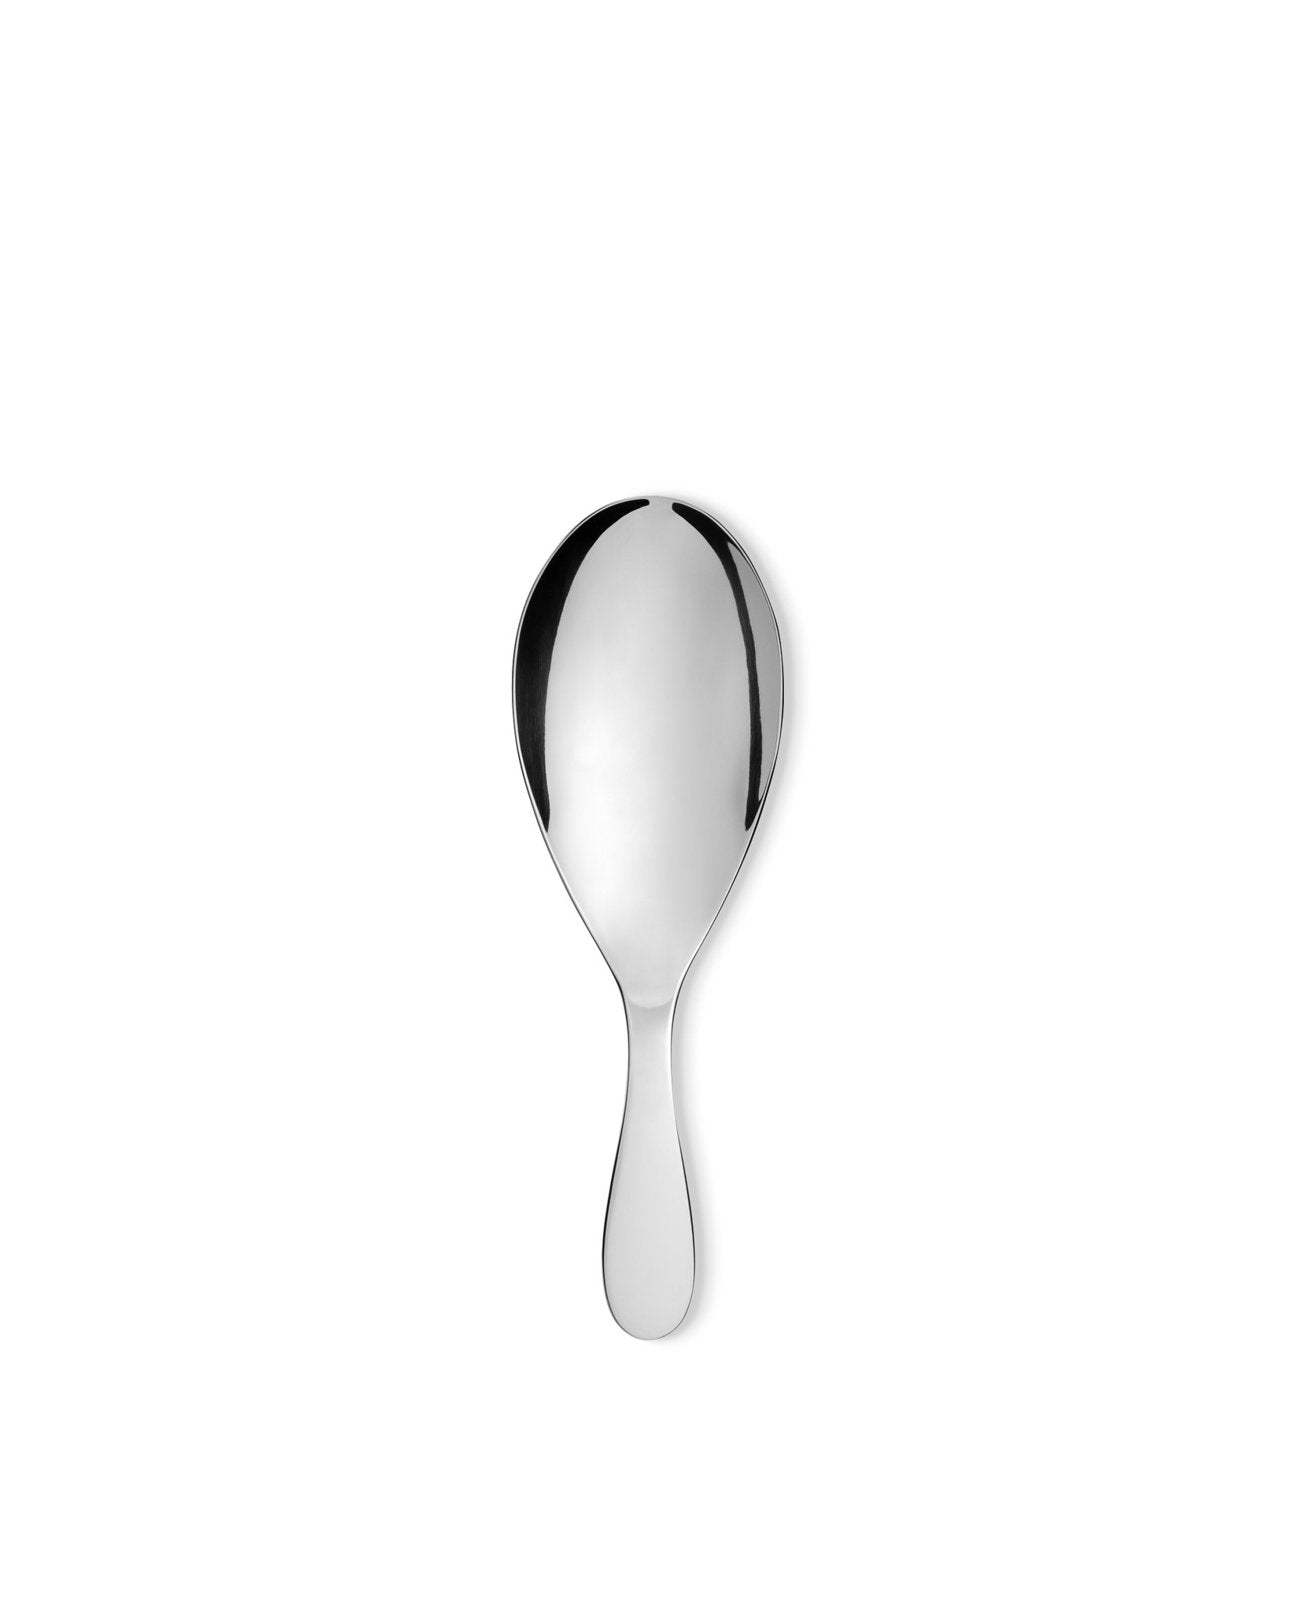 Alessi eat.it Risotto Serving Spoon | Panik Design